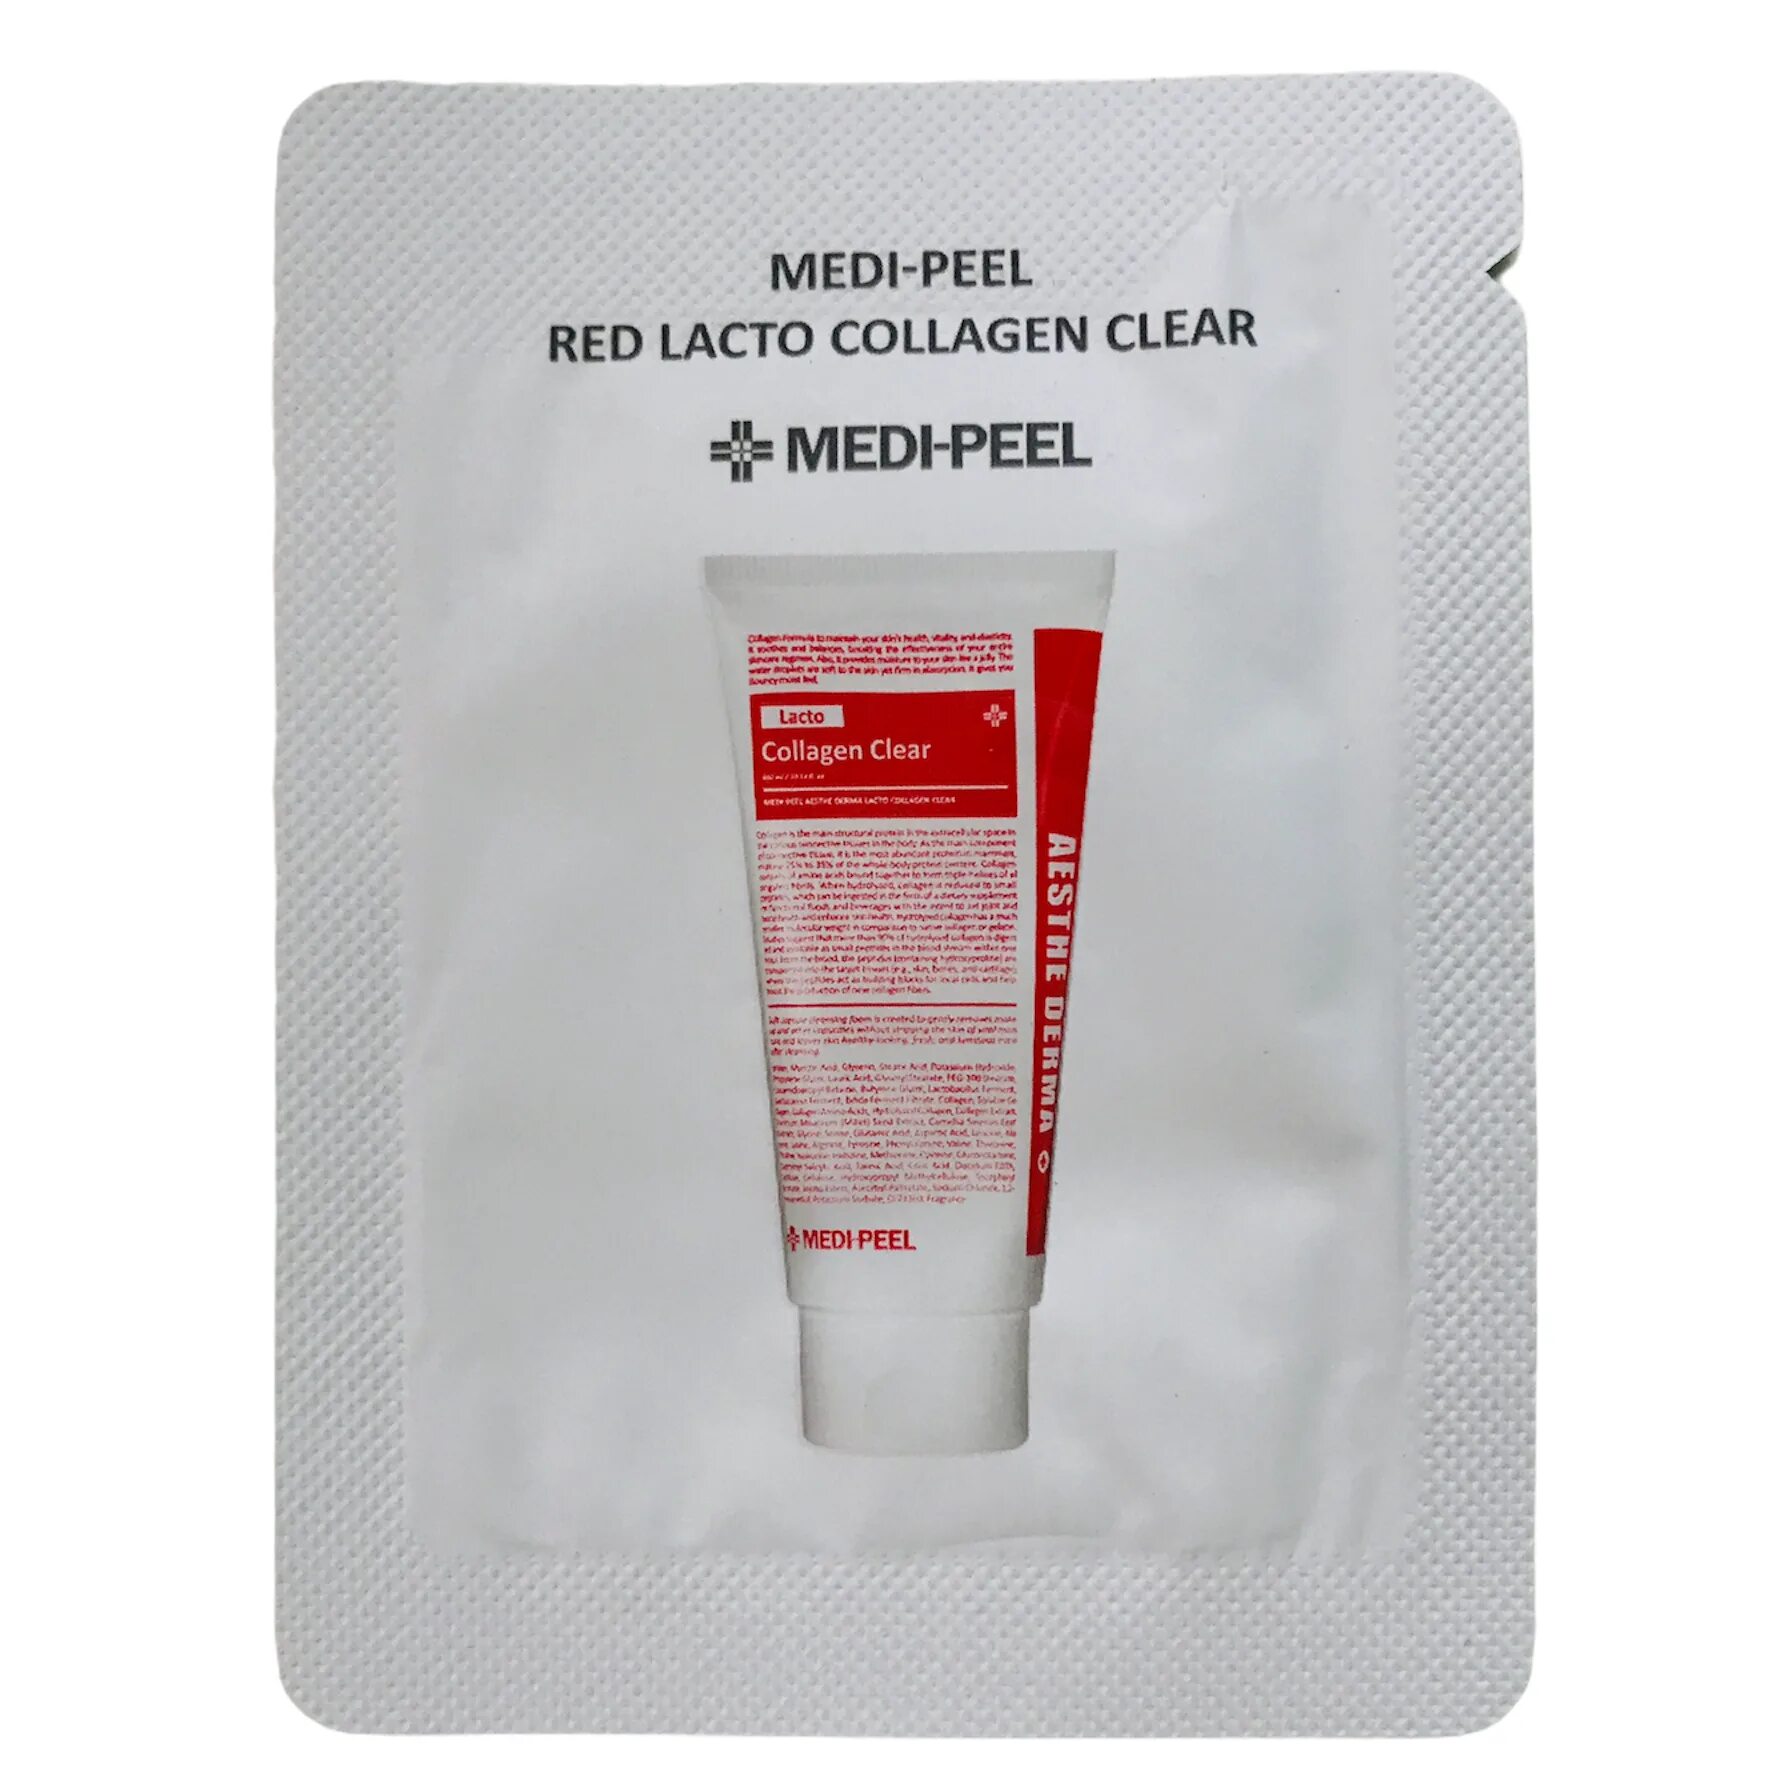 Medi-Peel Red lacto Collagen Clear (300ml). Aesthe Derma lacto Collagen Clear. Пенка для умывания Medi-Peel aesthe Derma lacto Collagen Clear. Очищающая пенка для умывания с коллагеном Medi-Peel Red lacto Collagen Clear. Medi peel gel